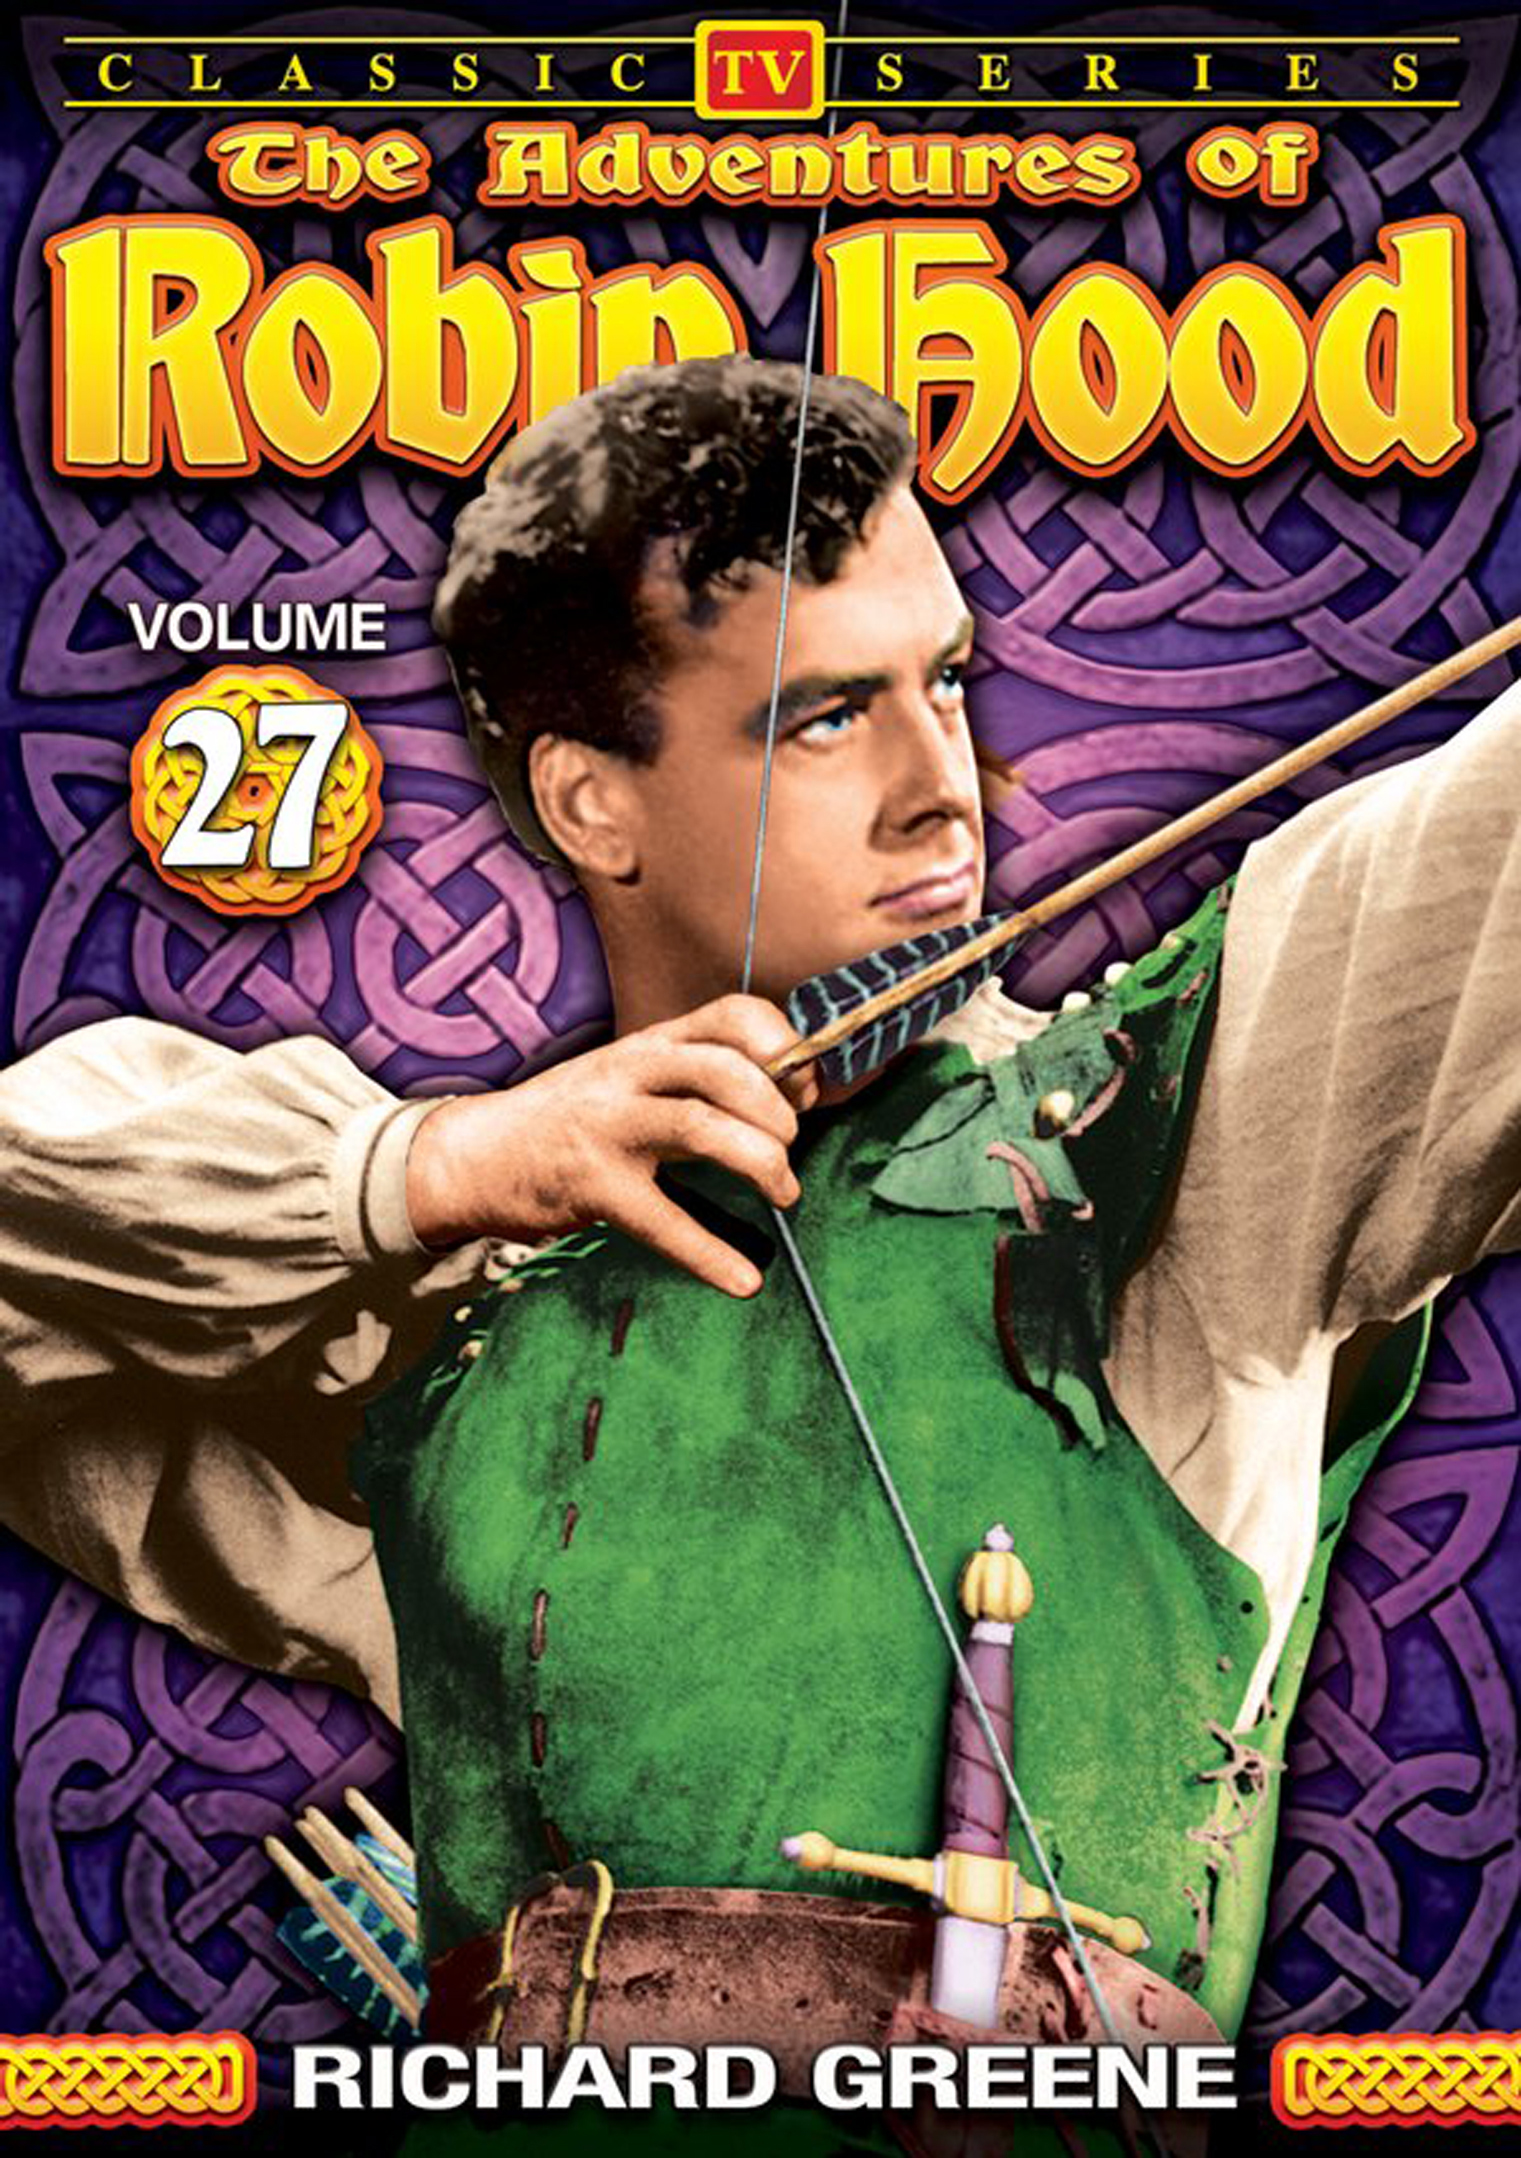 robin hood the legend of sherwood stage production